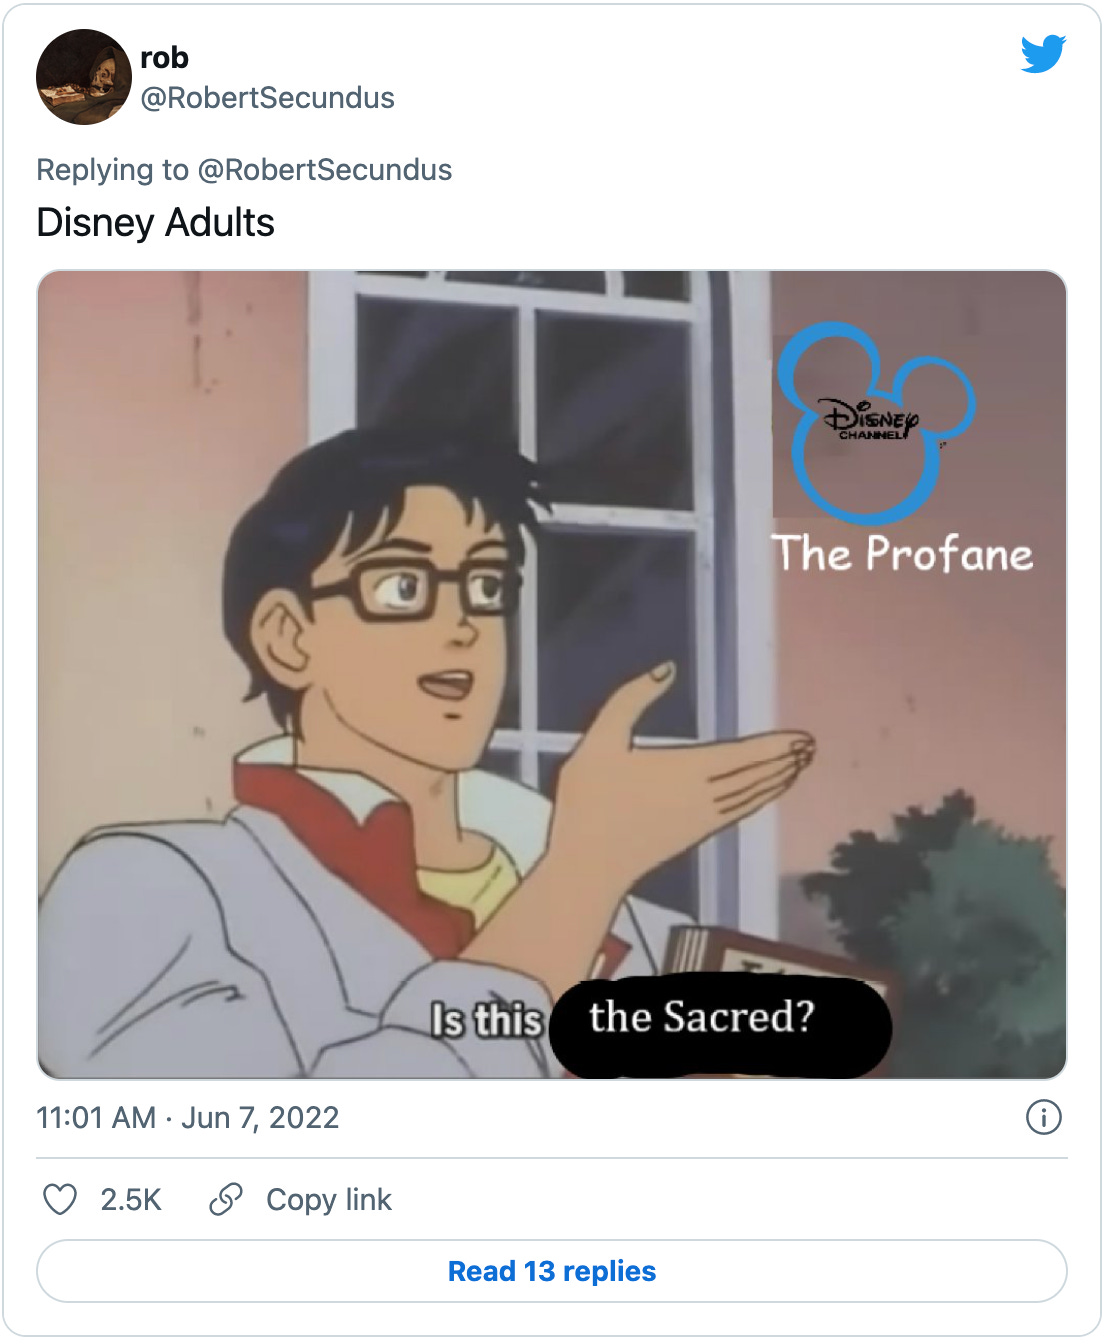 Tweet by @RobertSecundus that reads “Disney Adults” and has a butterfly meme where the anime guy gestures at the Disney logo and mouse ears that are labeled “The Profane” and asks “Is this the Sacred?” 